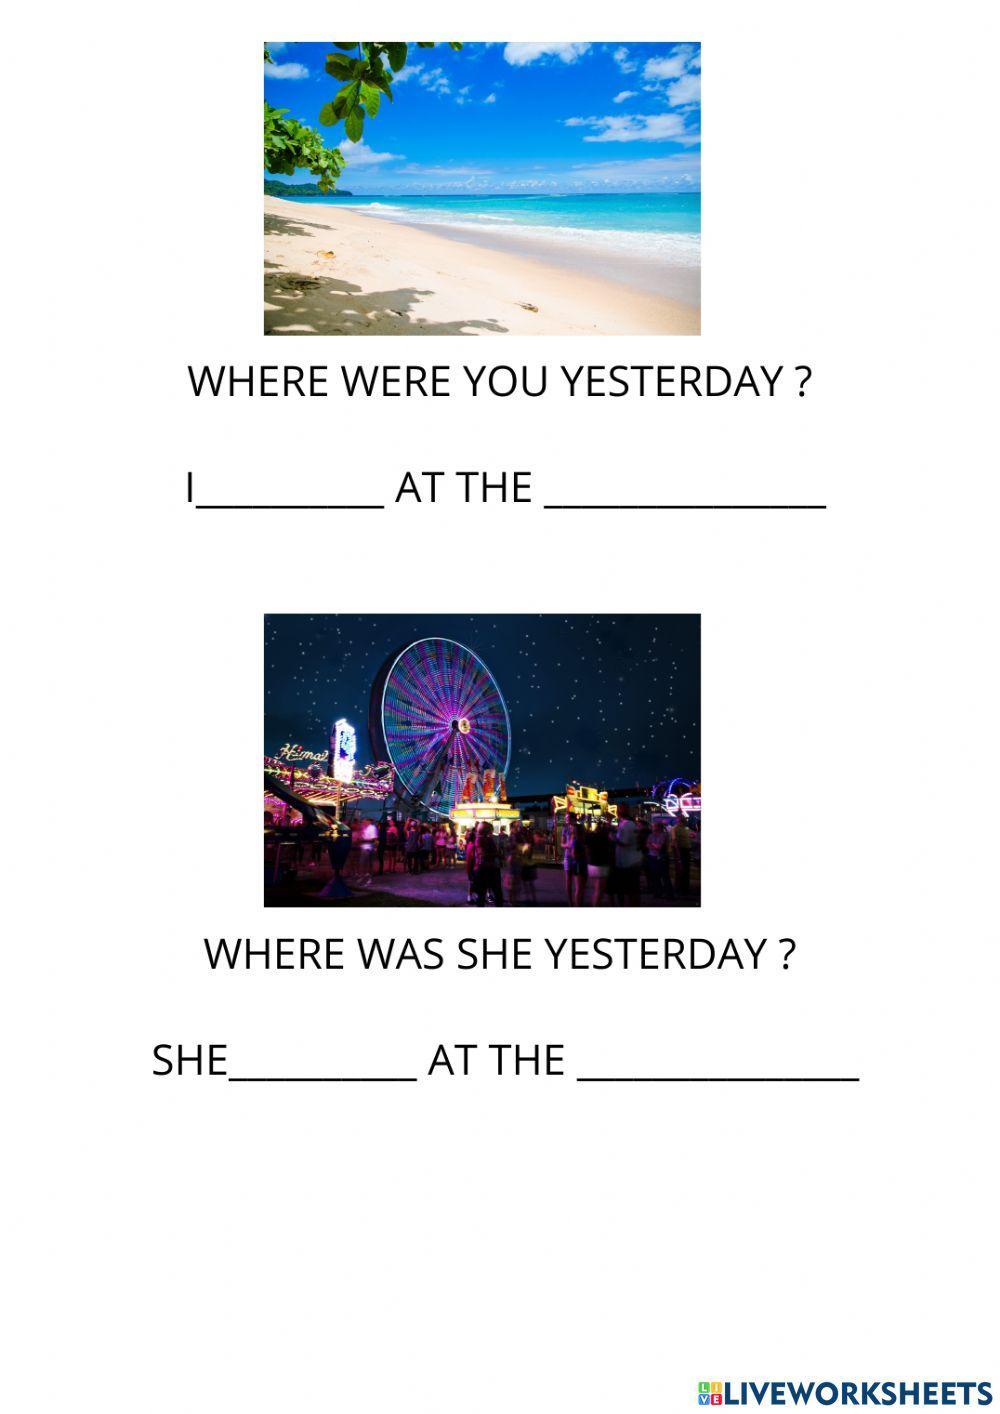 Where were you yesterday ?